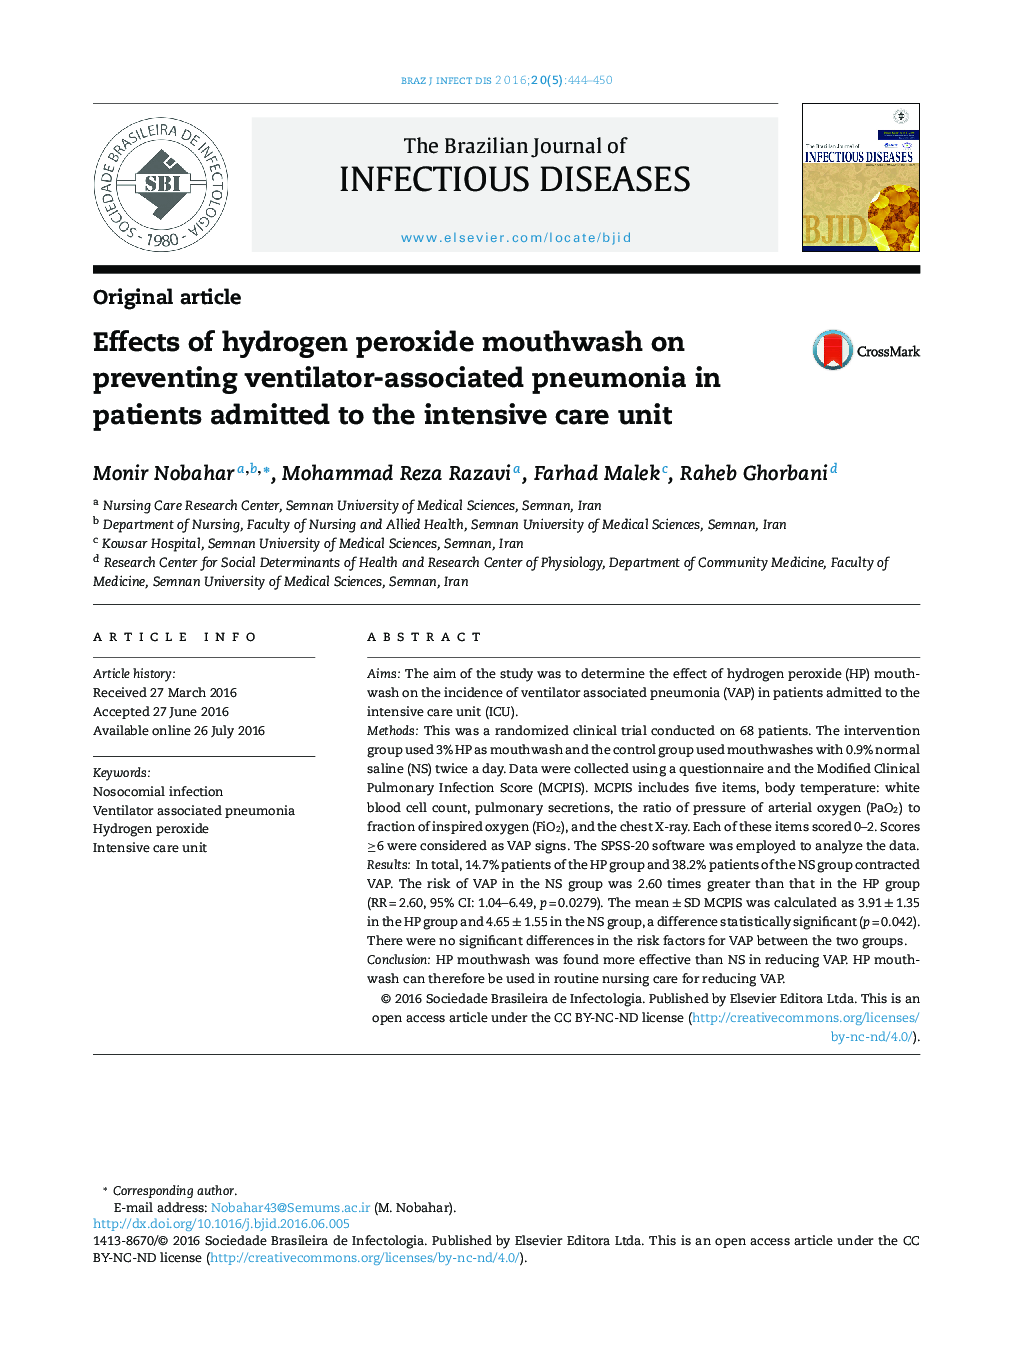 Effects of hydrogen peroxide mouthwash on preventing ventilator-associated pneumonia in patients admitted to the intensive care unit